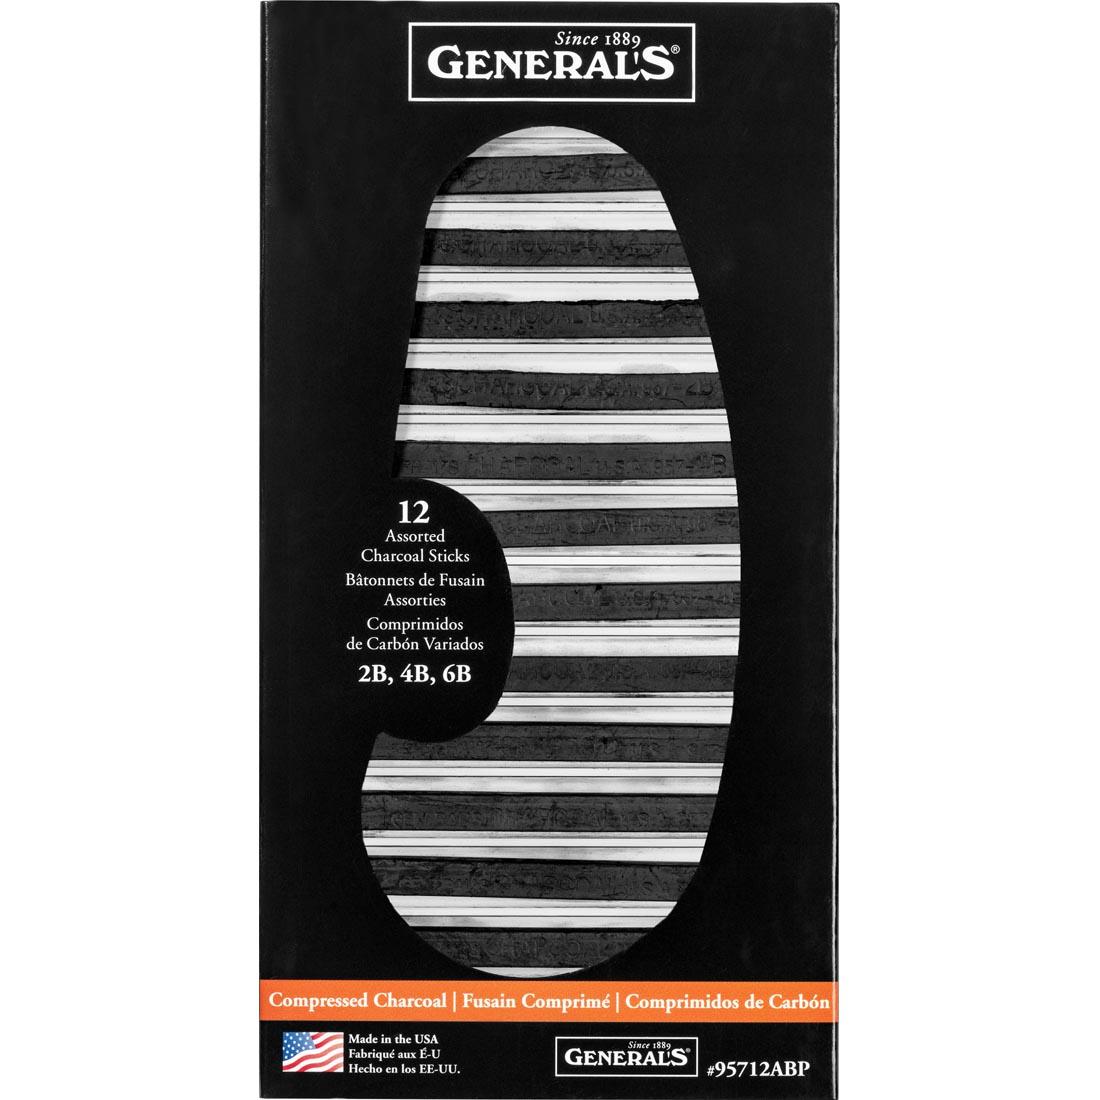 General's Compressed Charcoal Sticks 12-Count Assortment